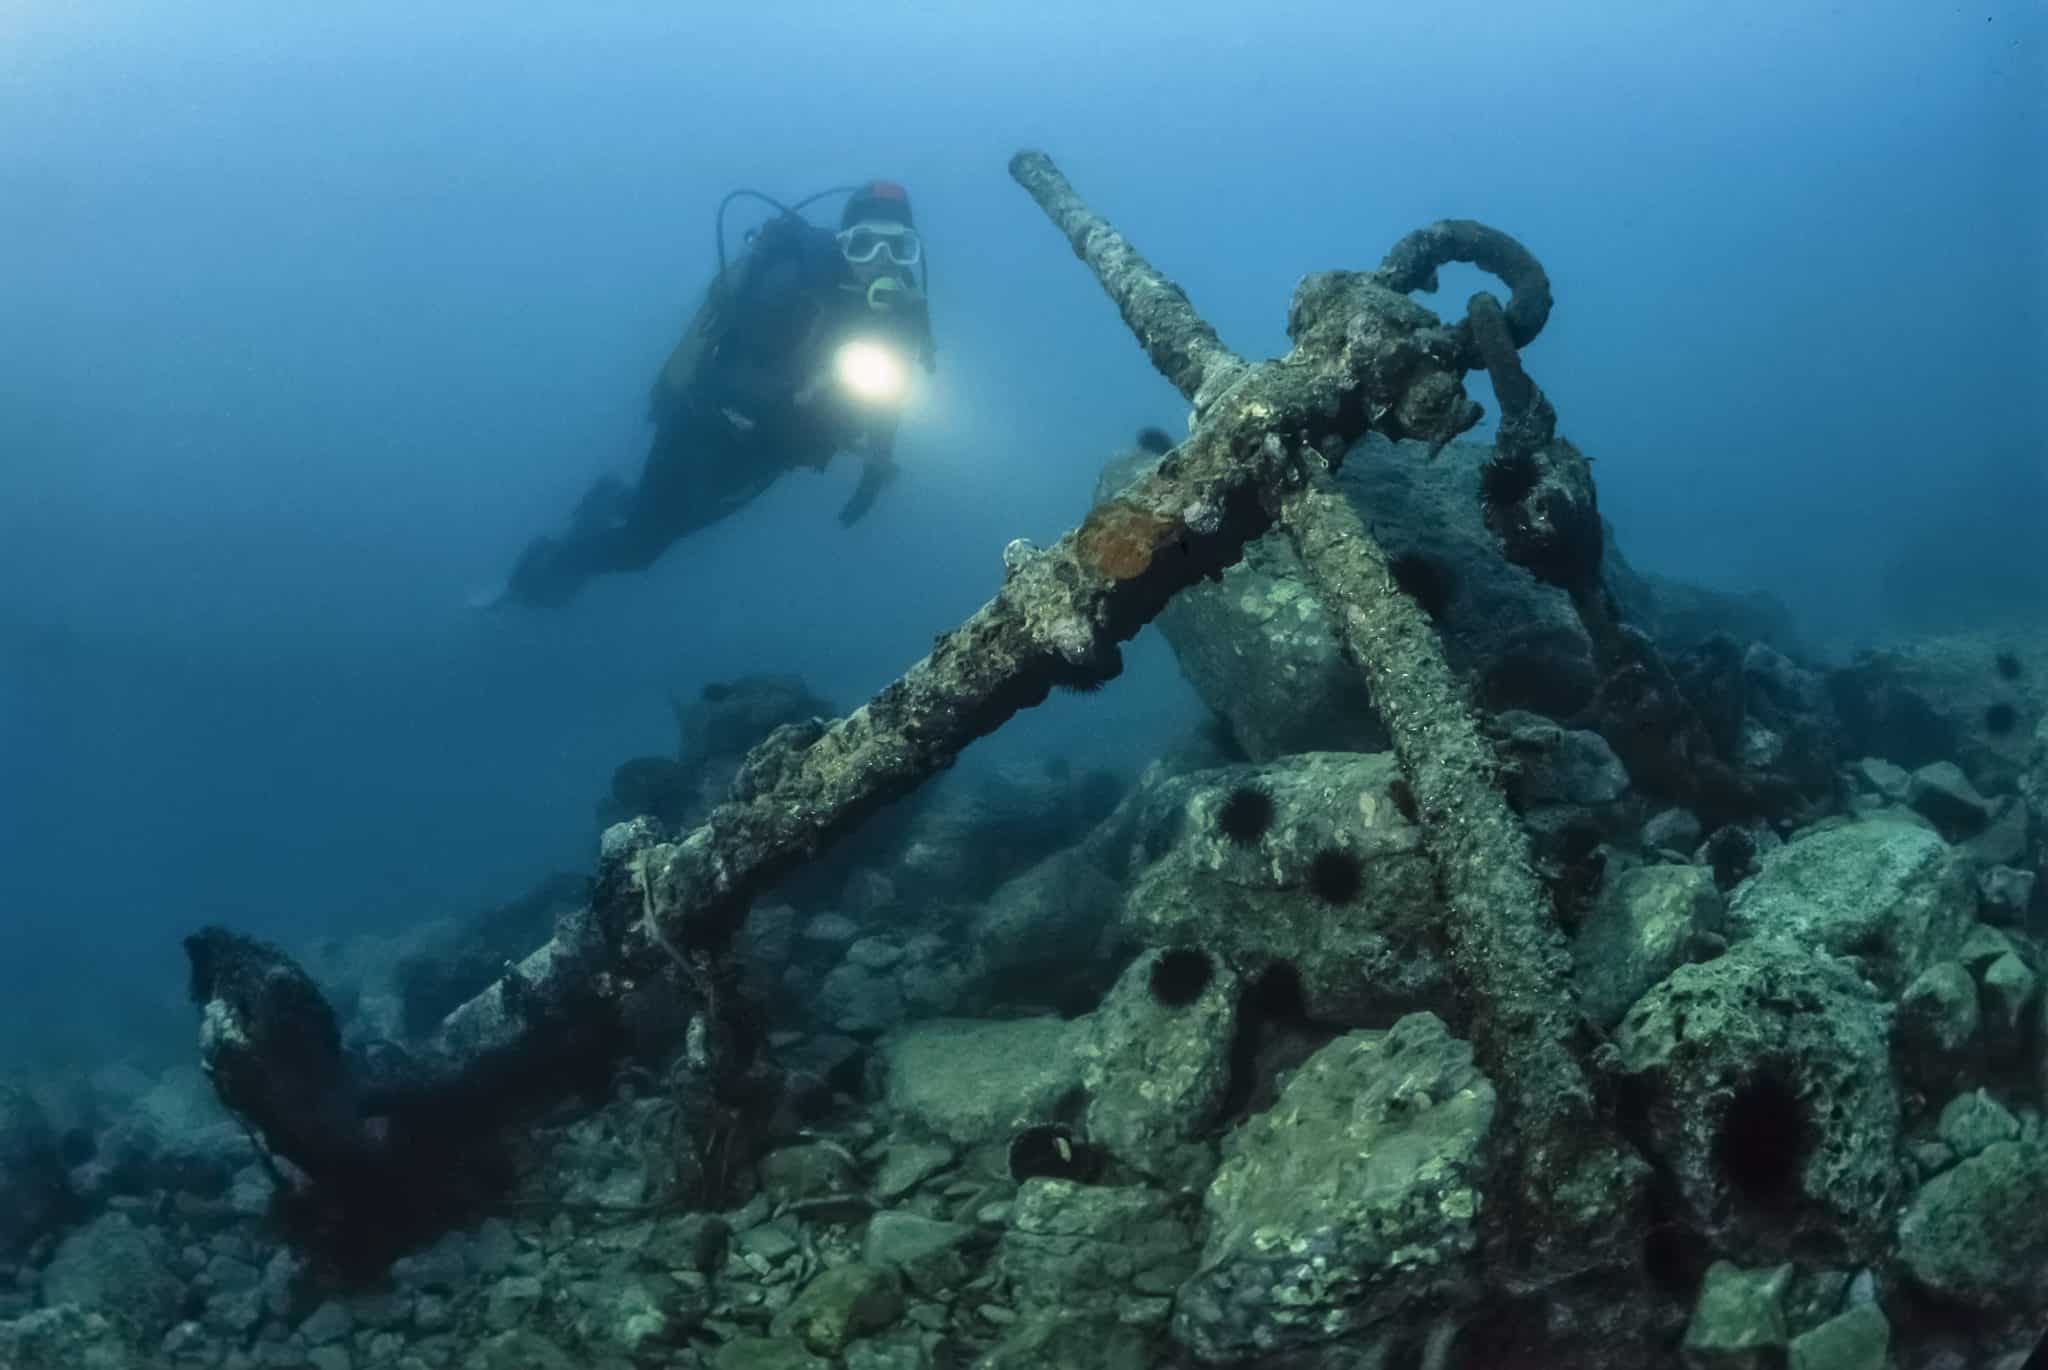 Billions worth of underwater artefacts become real use case for Non-Fungible Tokens